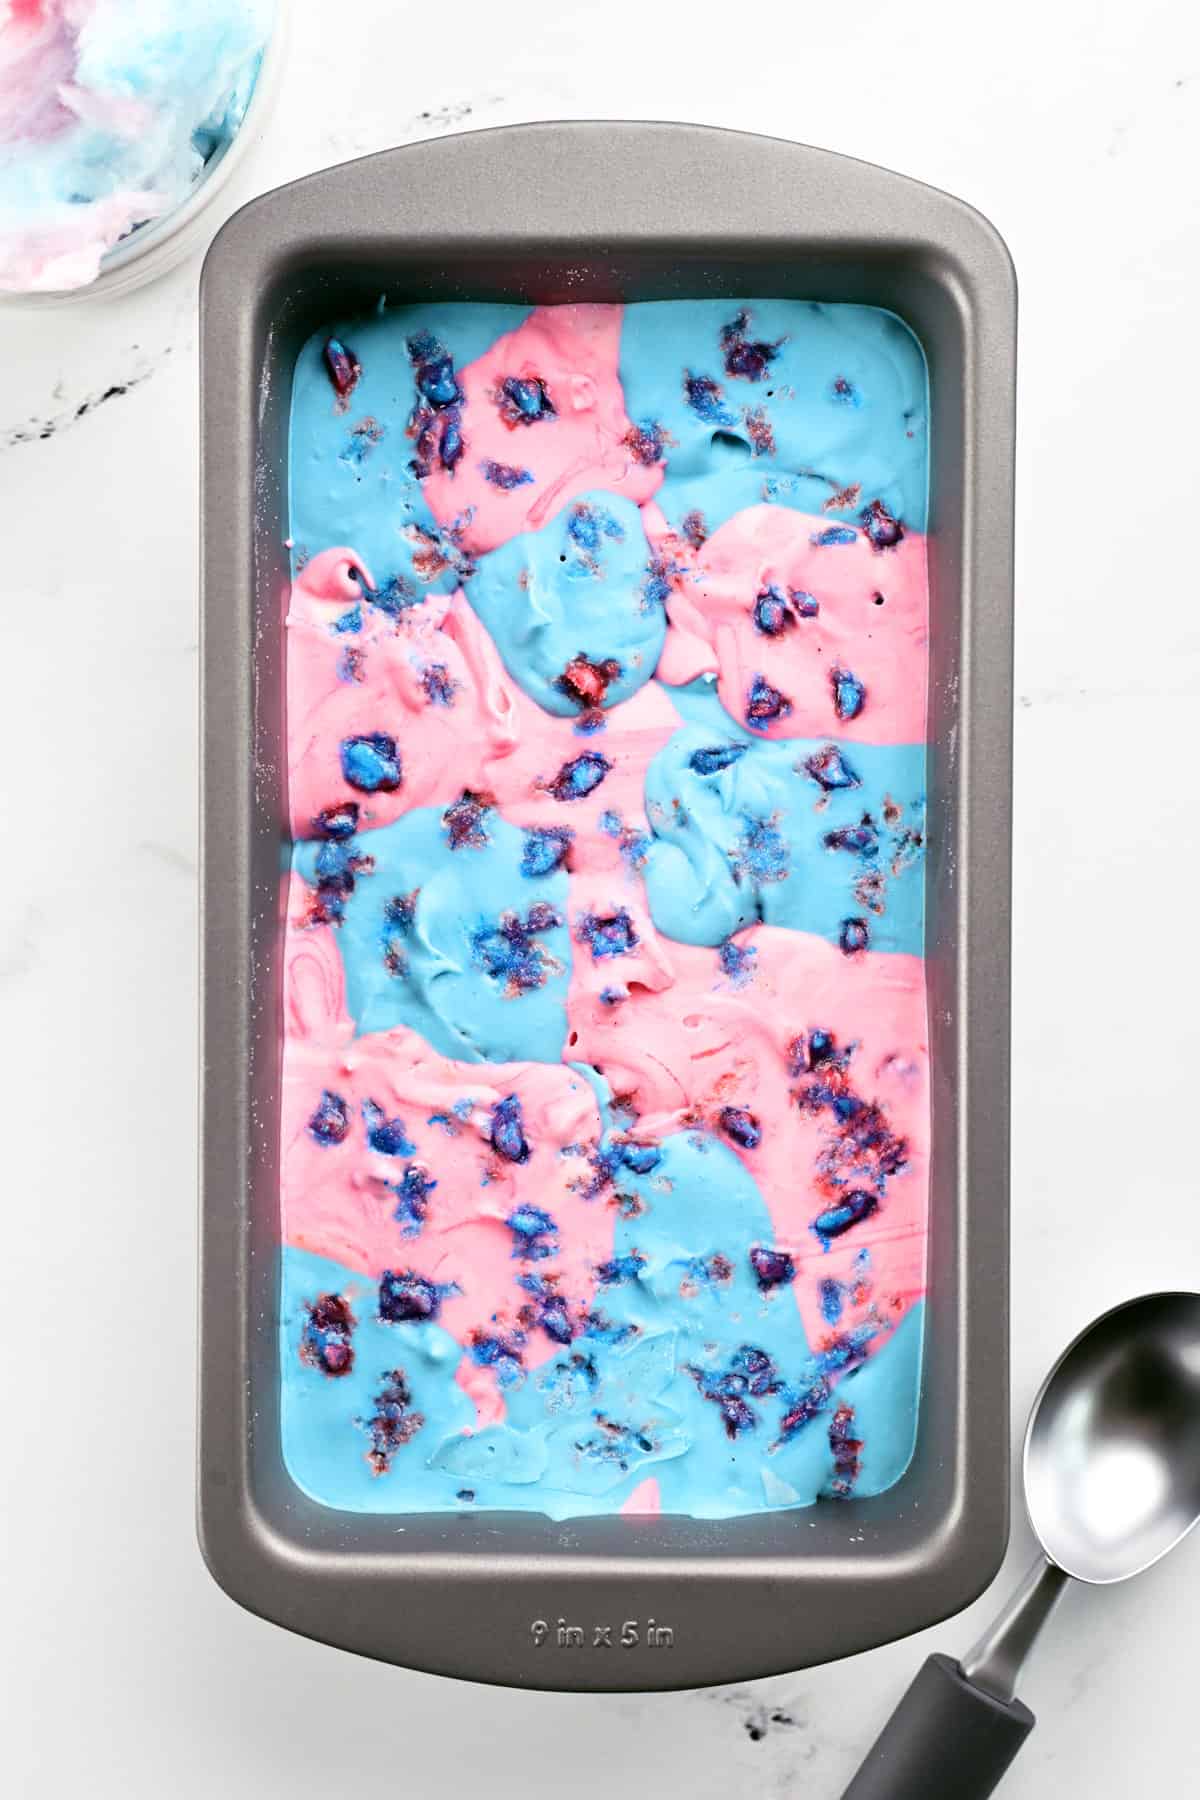 Cotton candy ice cream in a pan with an ice cream server and a bowl of cotton candy set nearby.